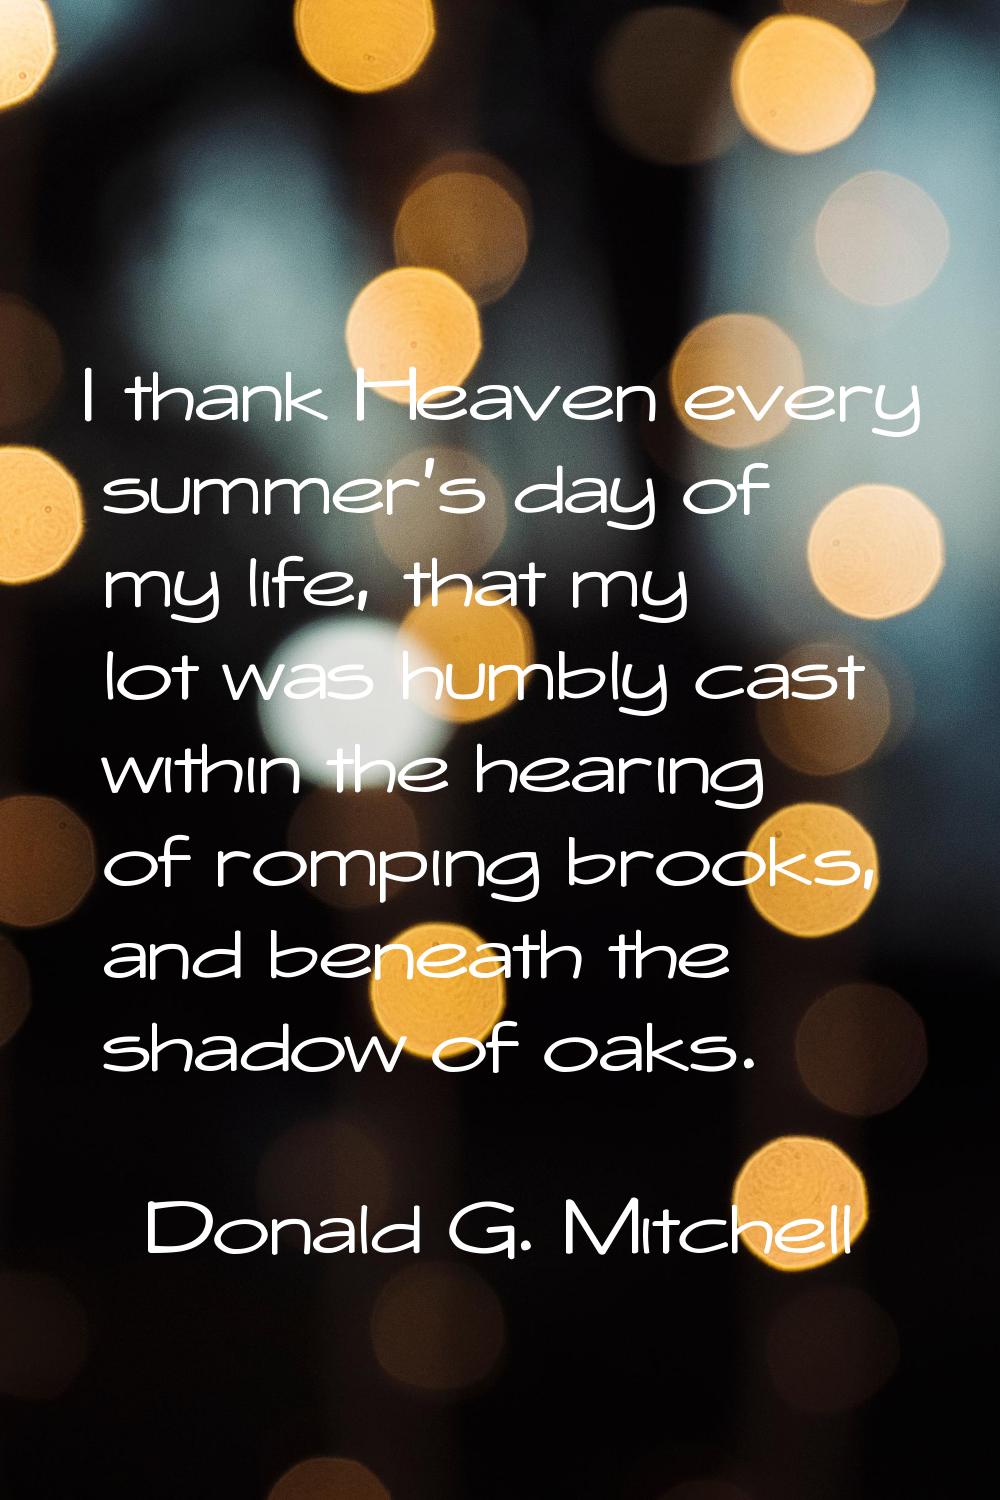 I thank Heaven every summer's day of my life, that my lot was humbly cast within the hearing of rom